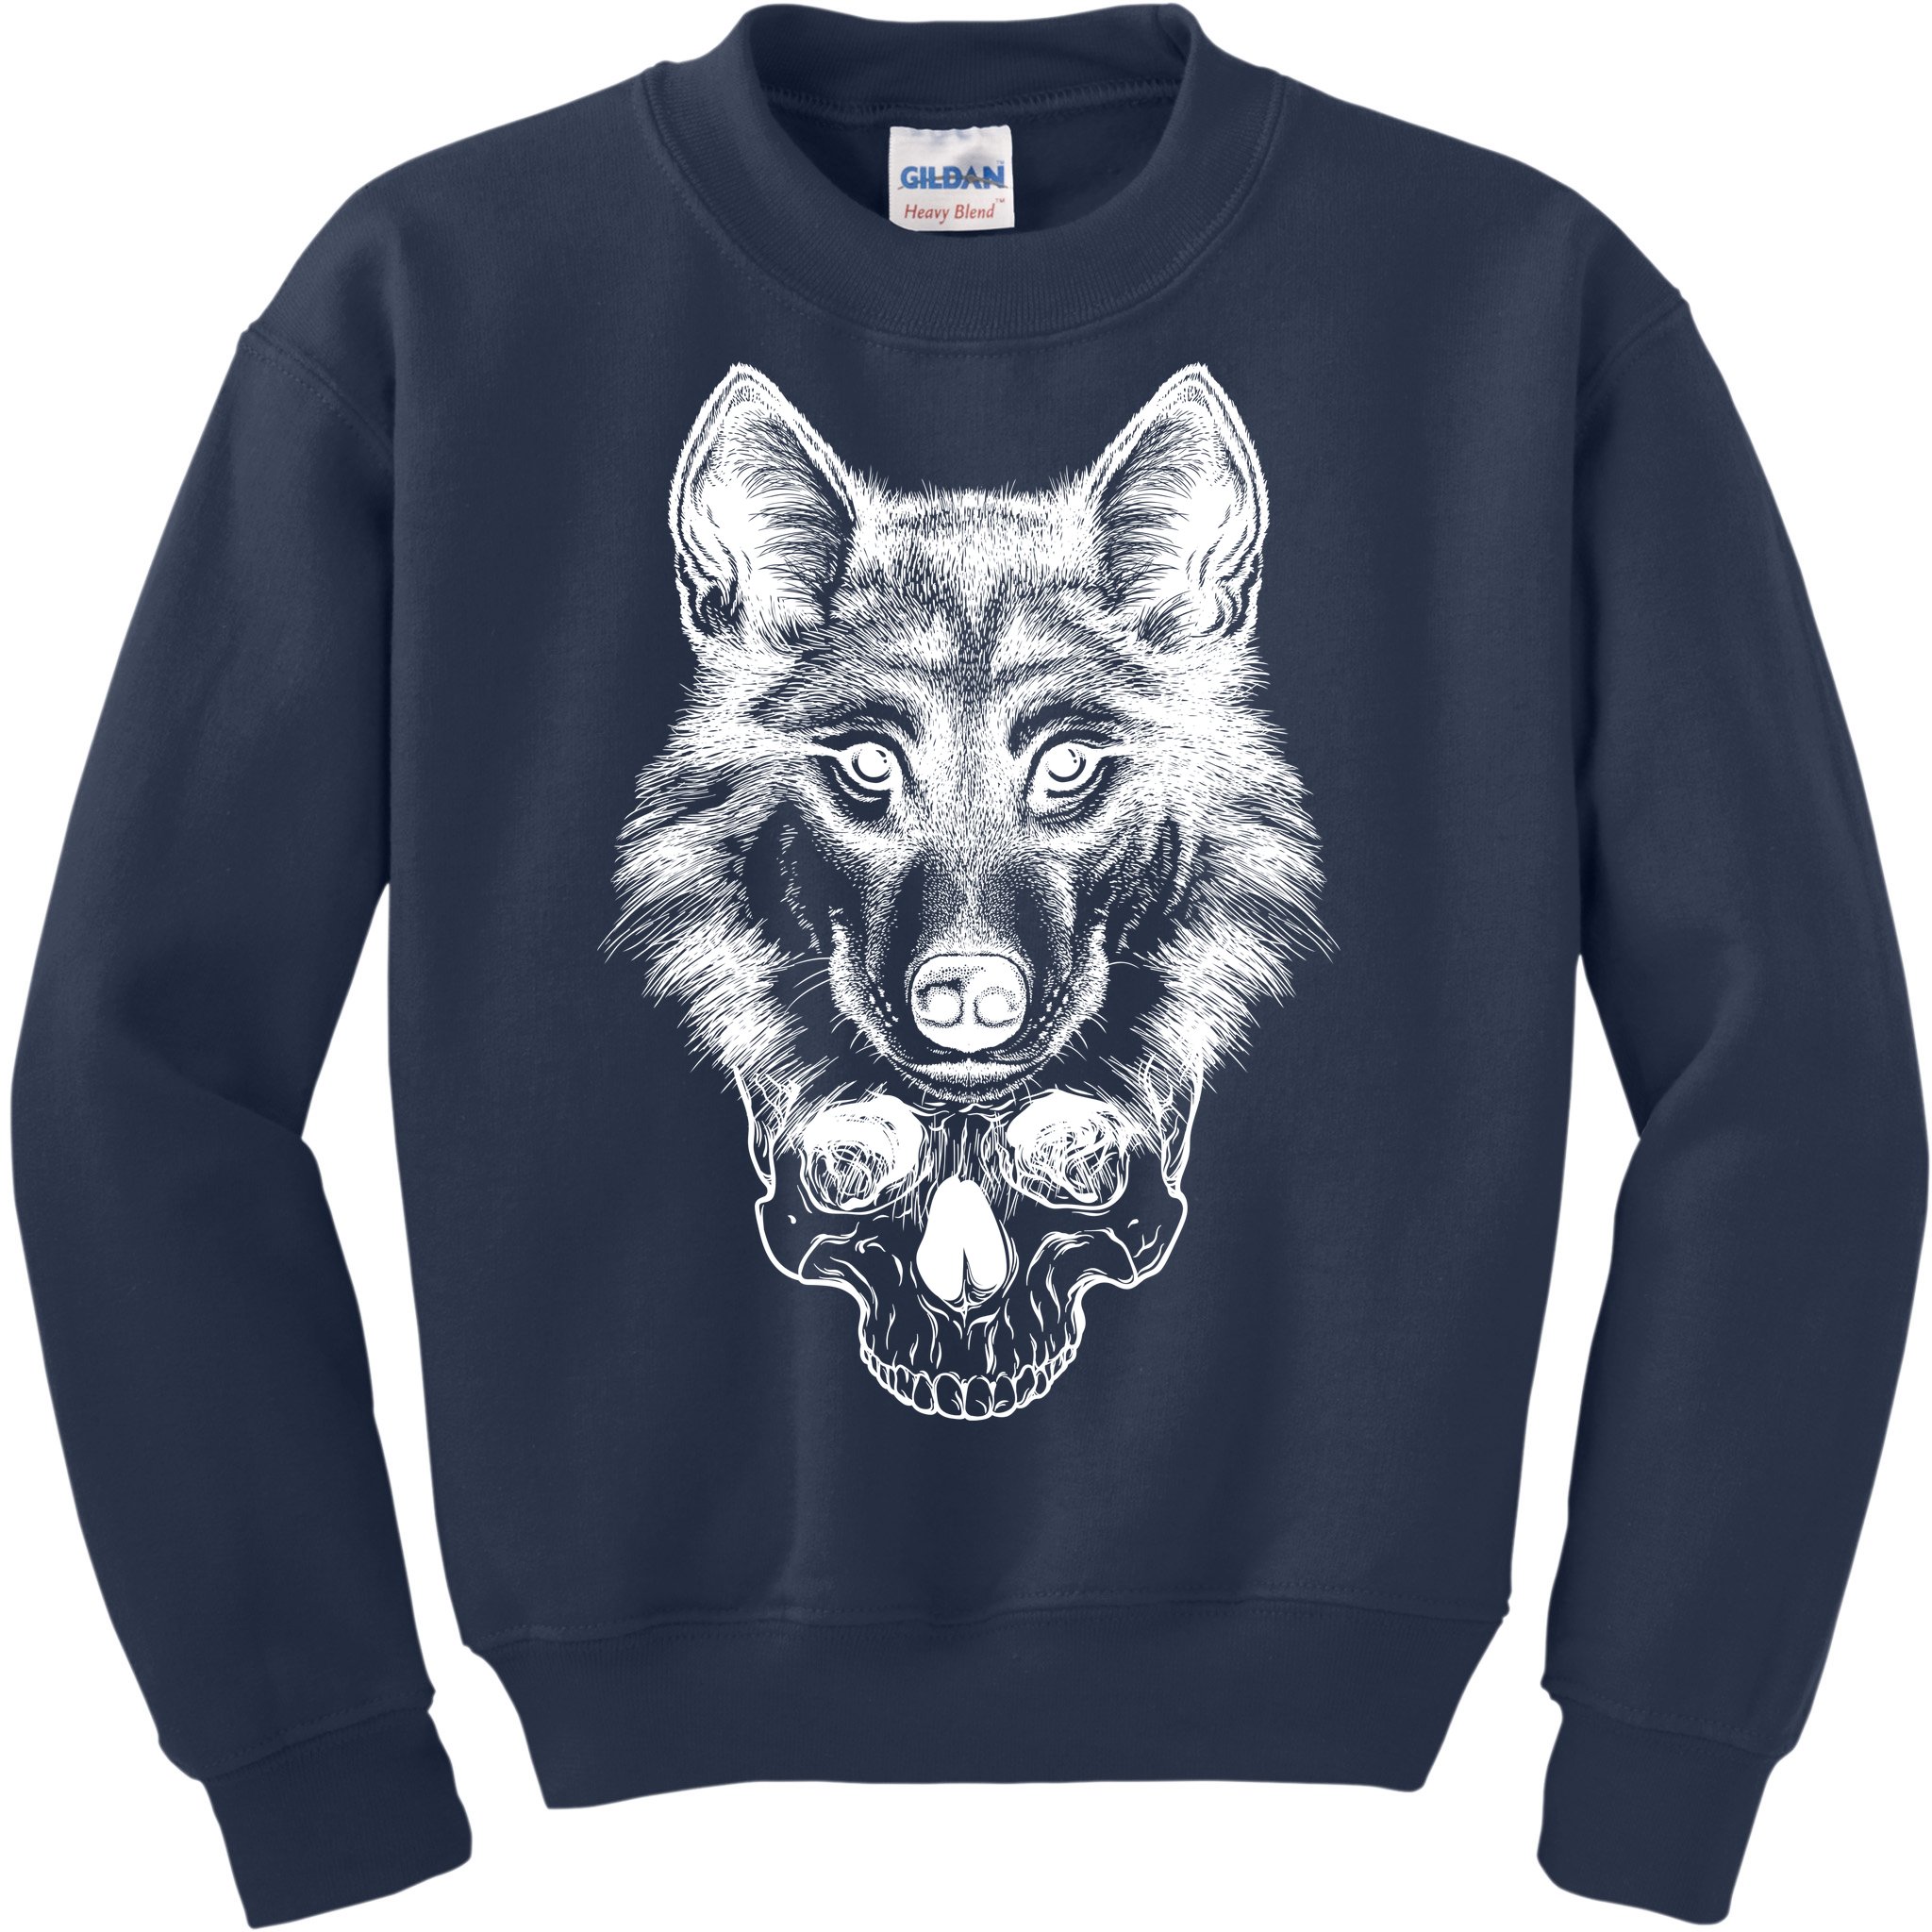 My wife (in the photo) designed the sweatshirt for the wolves for